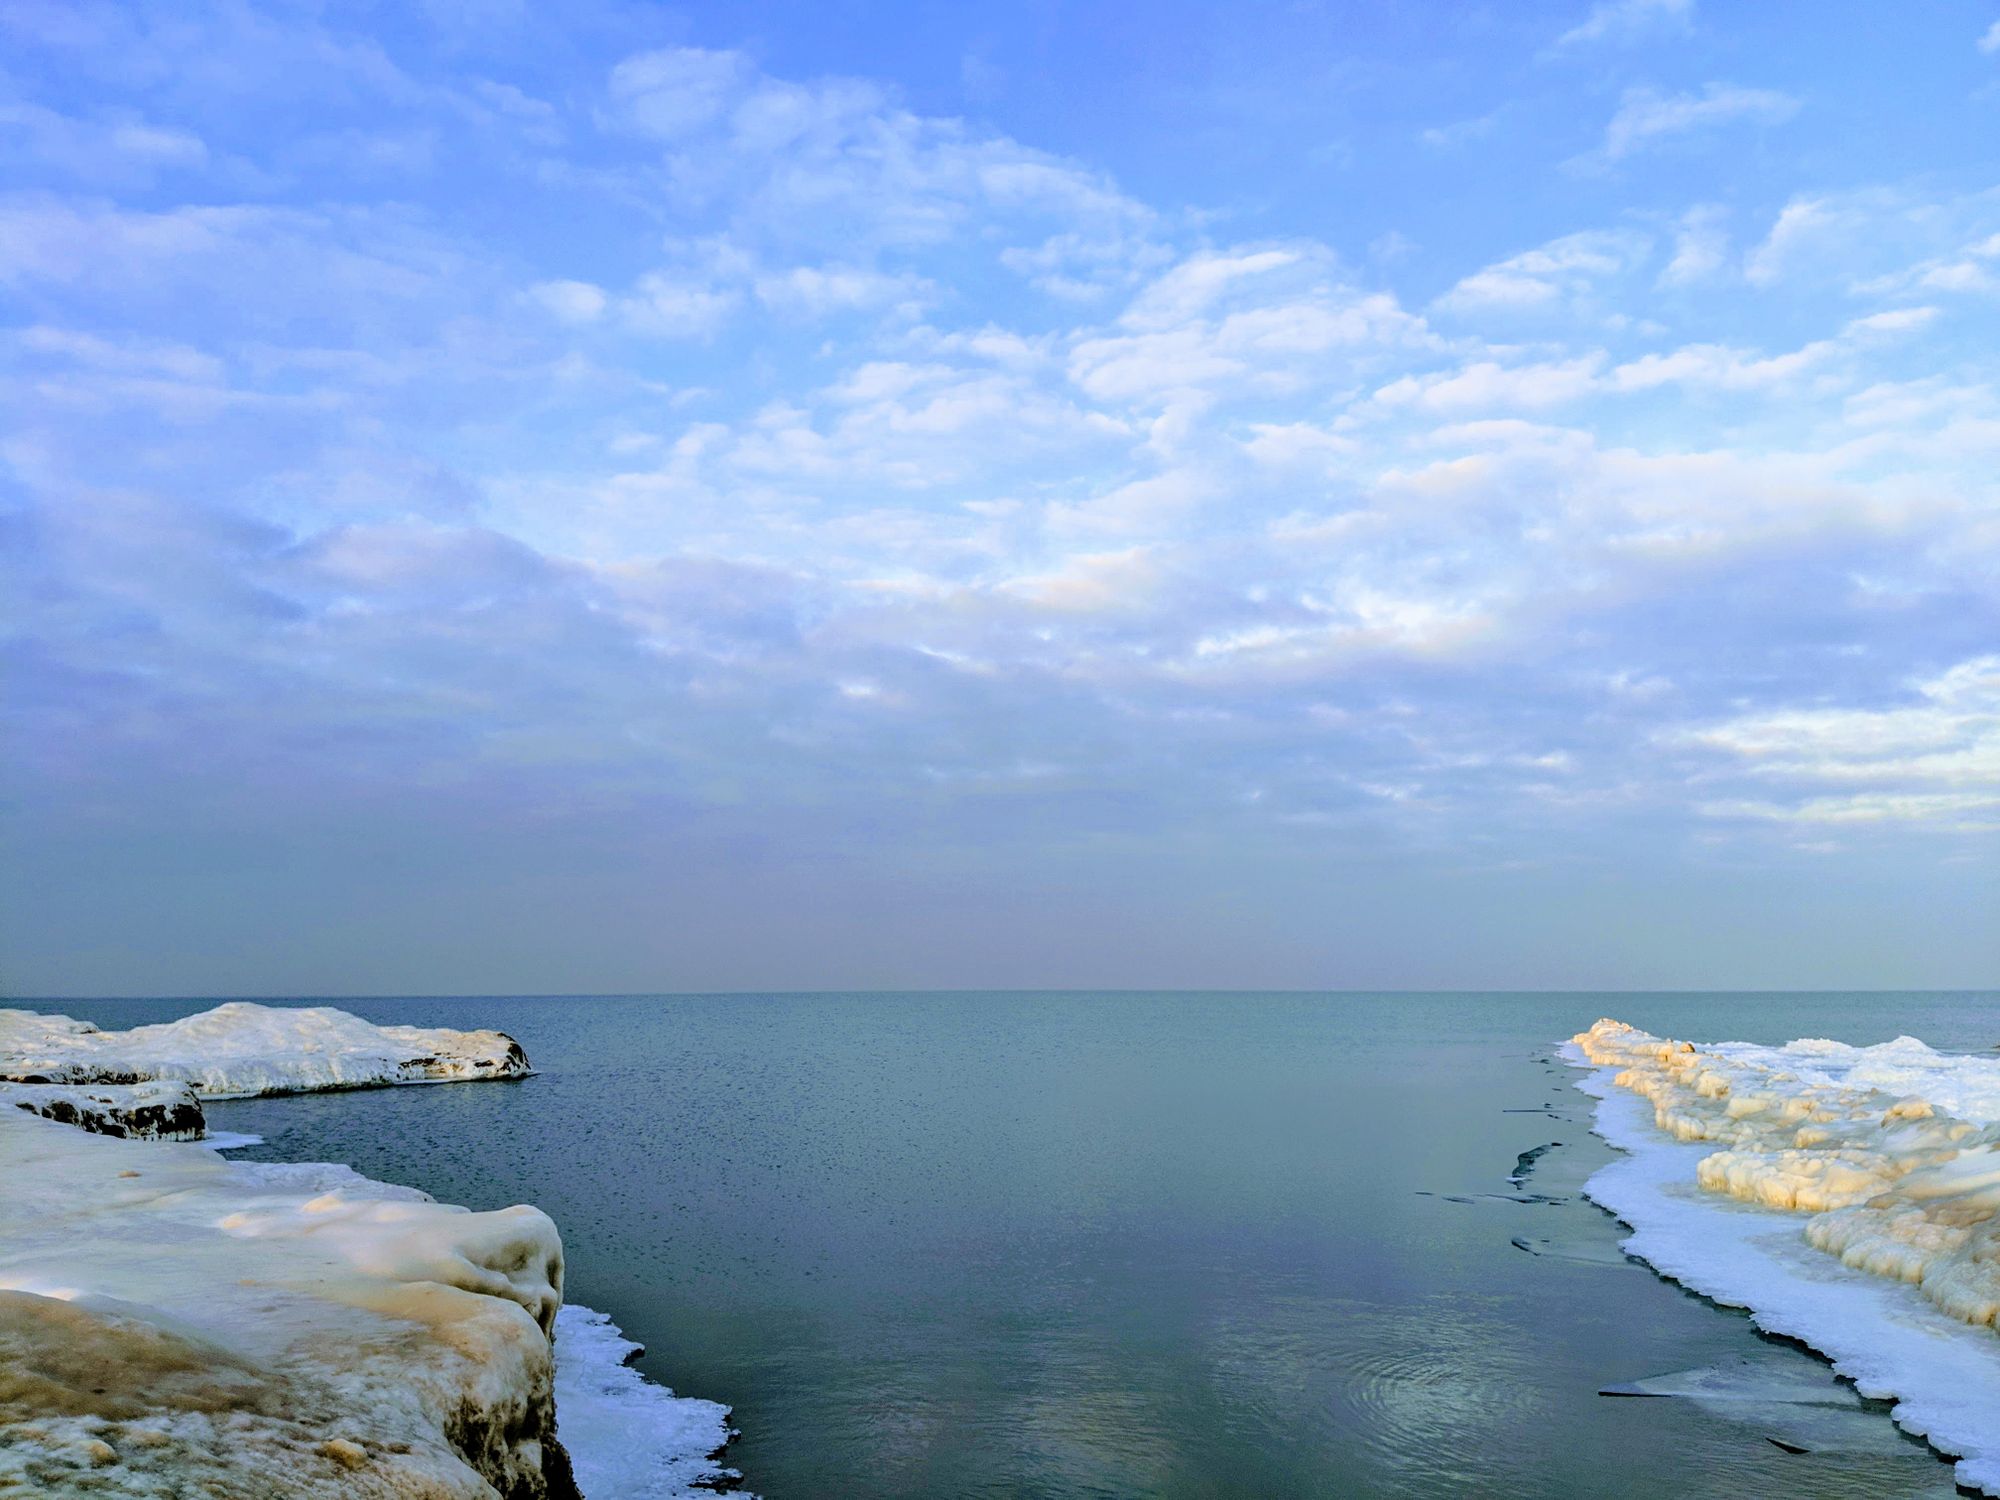 A wintry view of a body of water - Taken by Kevin Koperski